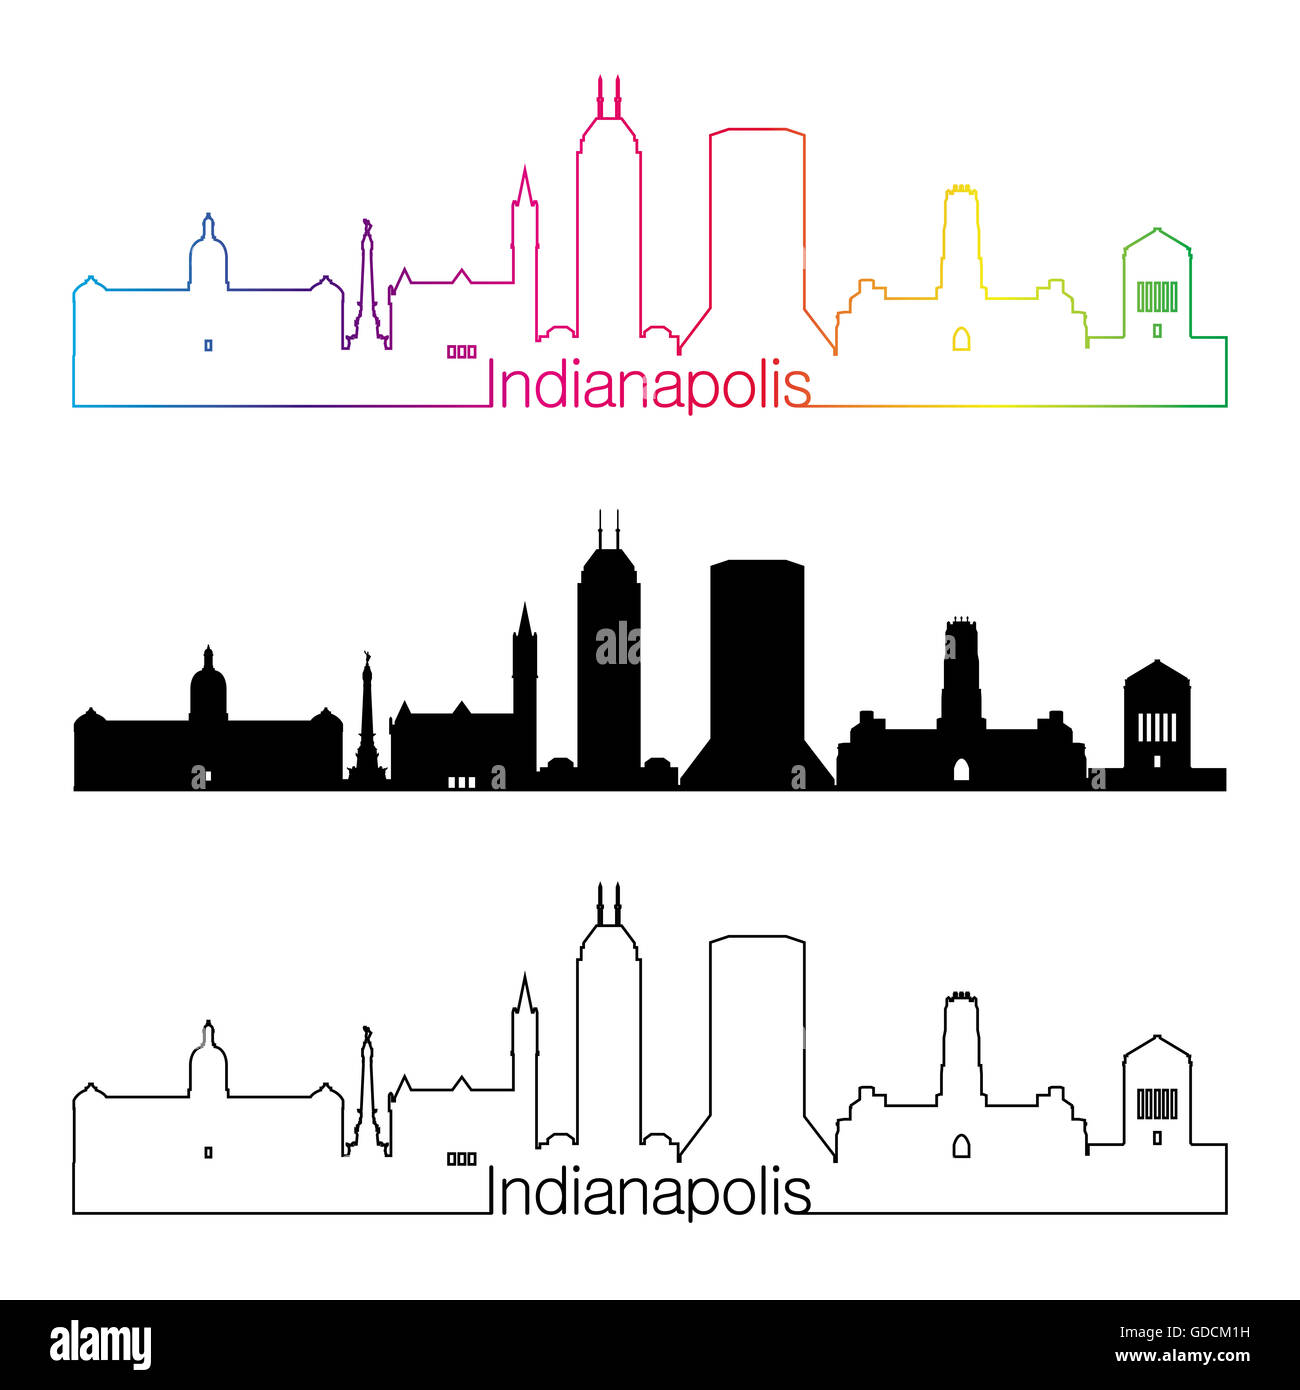 Downtown indianapolis indiana Cut Out Stock Images & Pictures Alamy